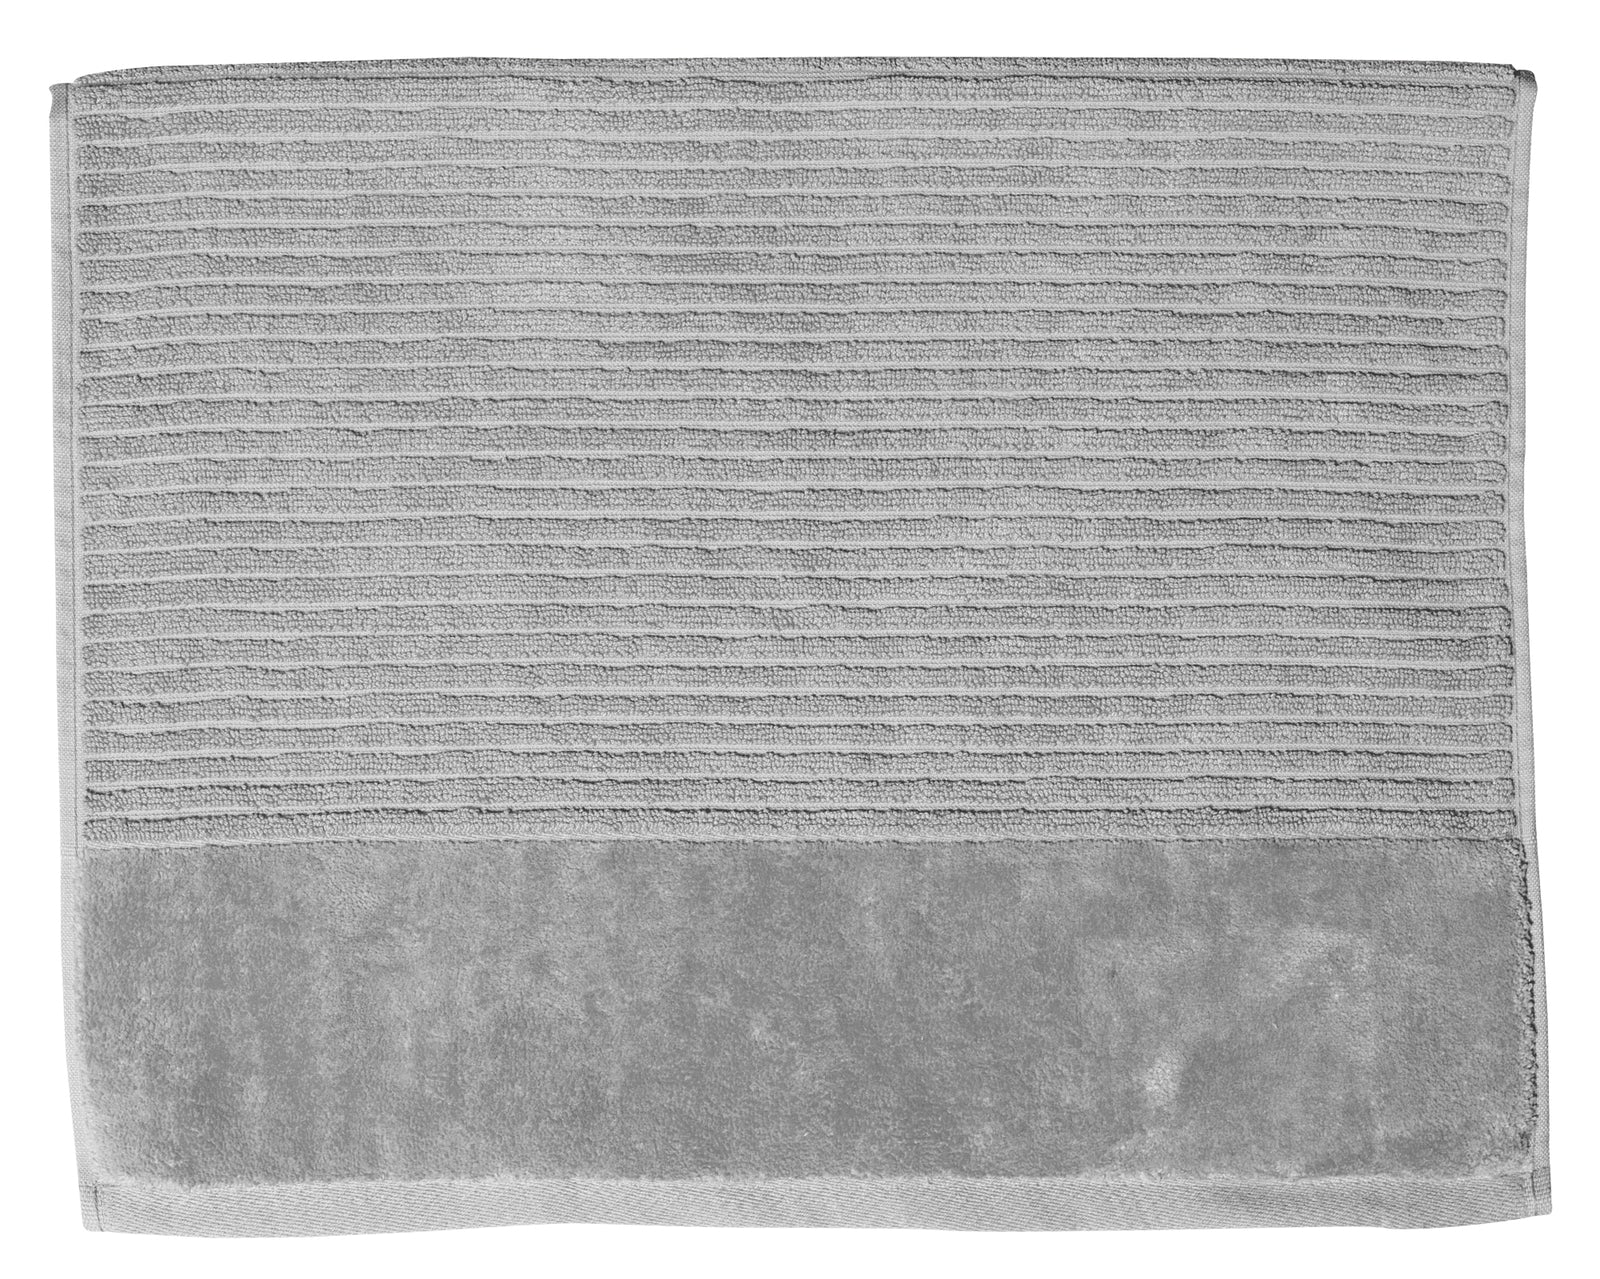 Jenny Mclean Royal Excellency Bath Mats 2 ply sheared Border 1100GSM in Plaster